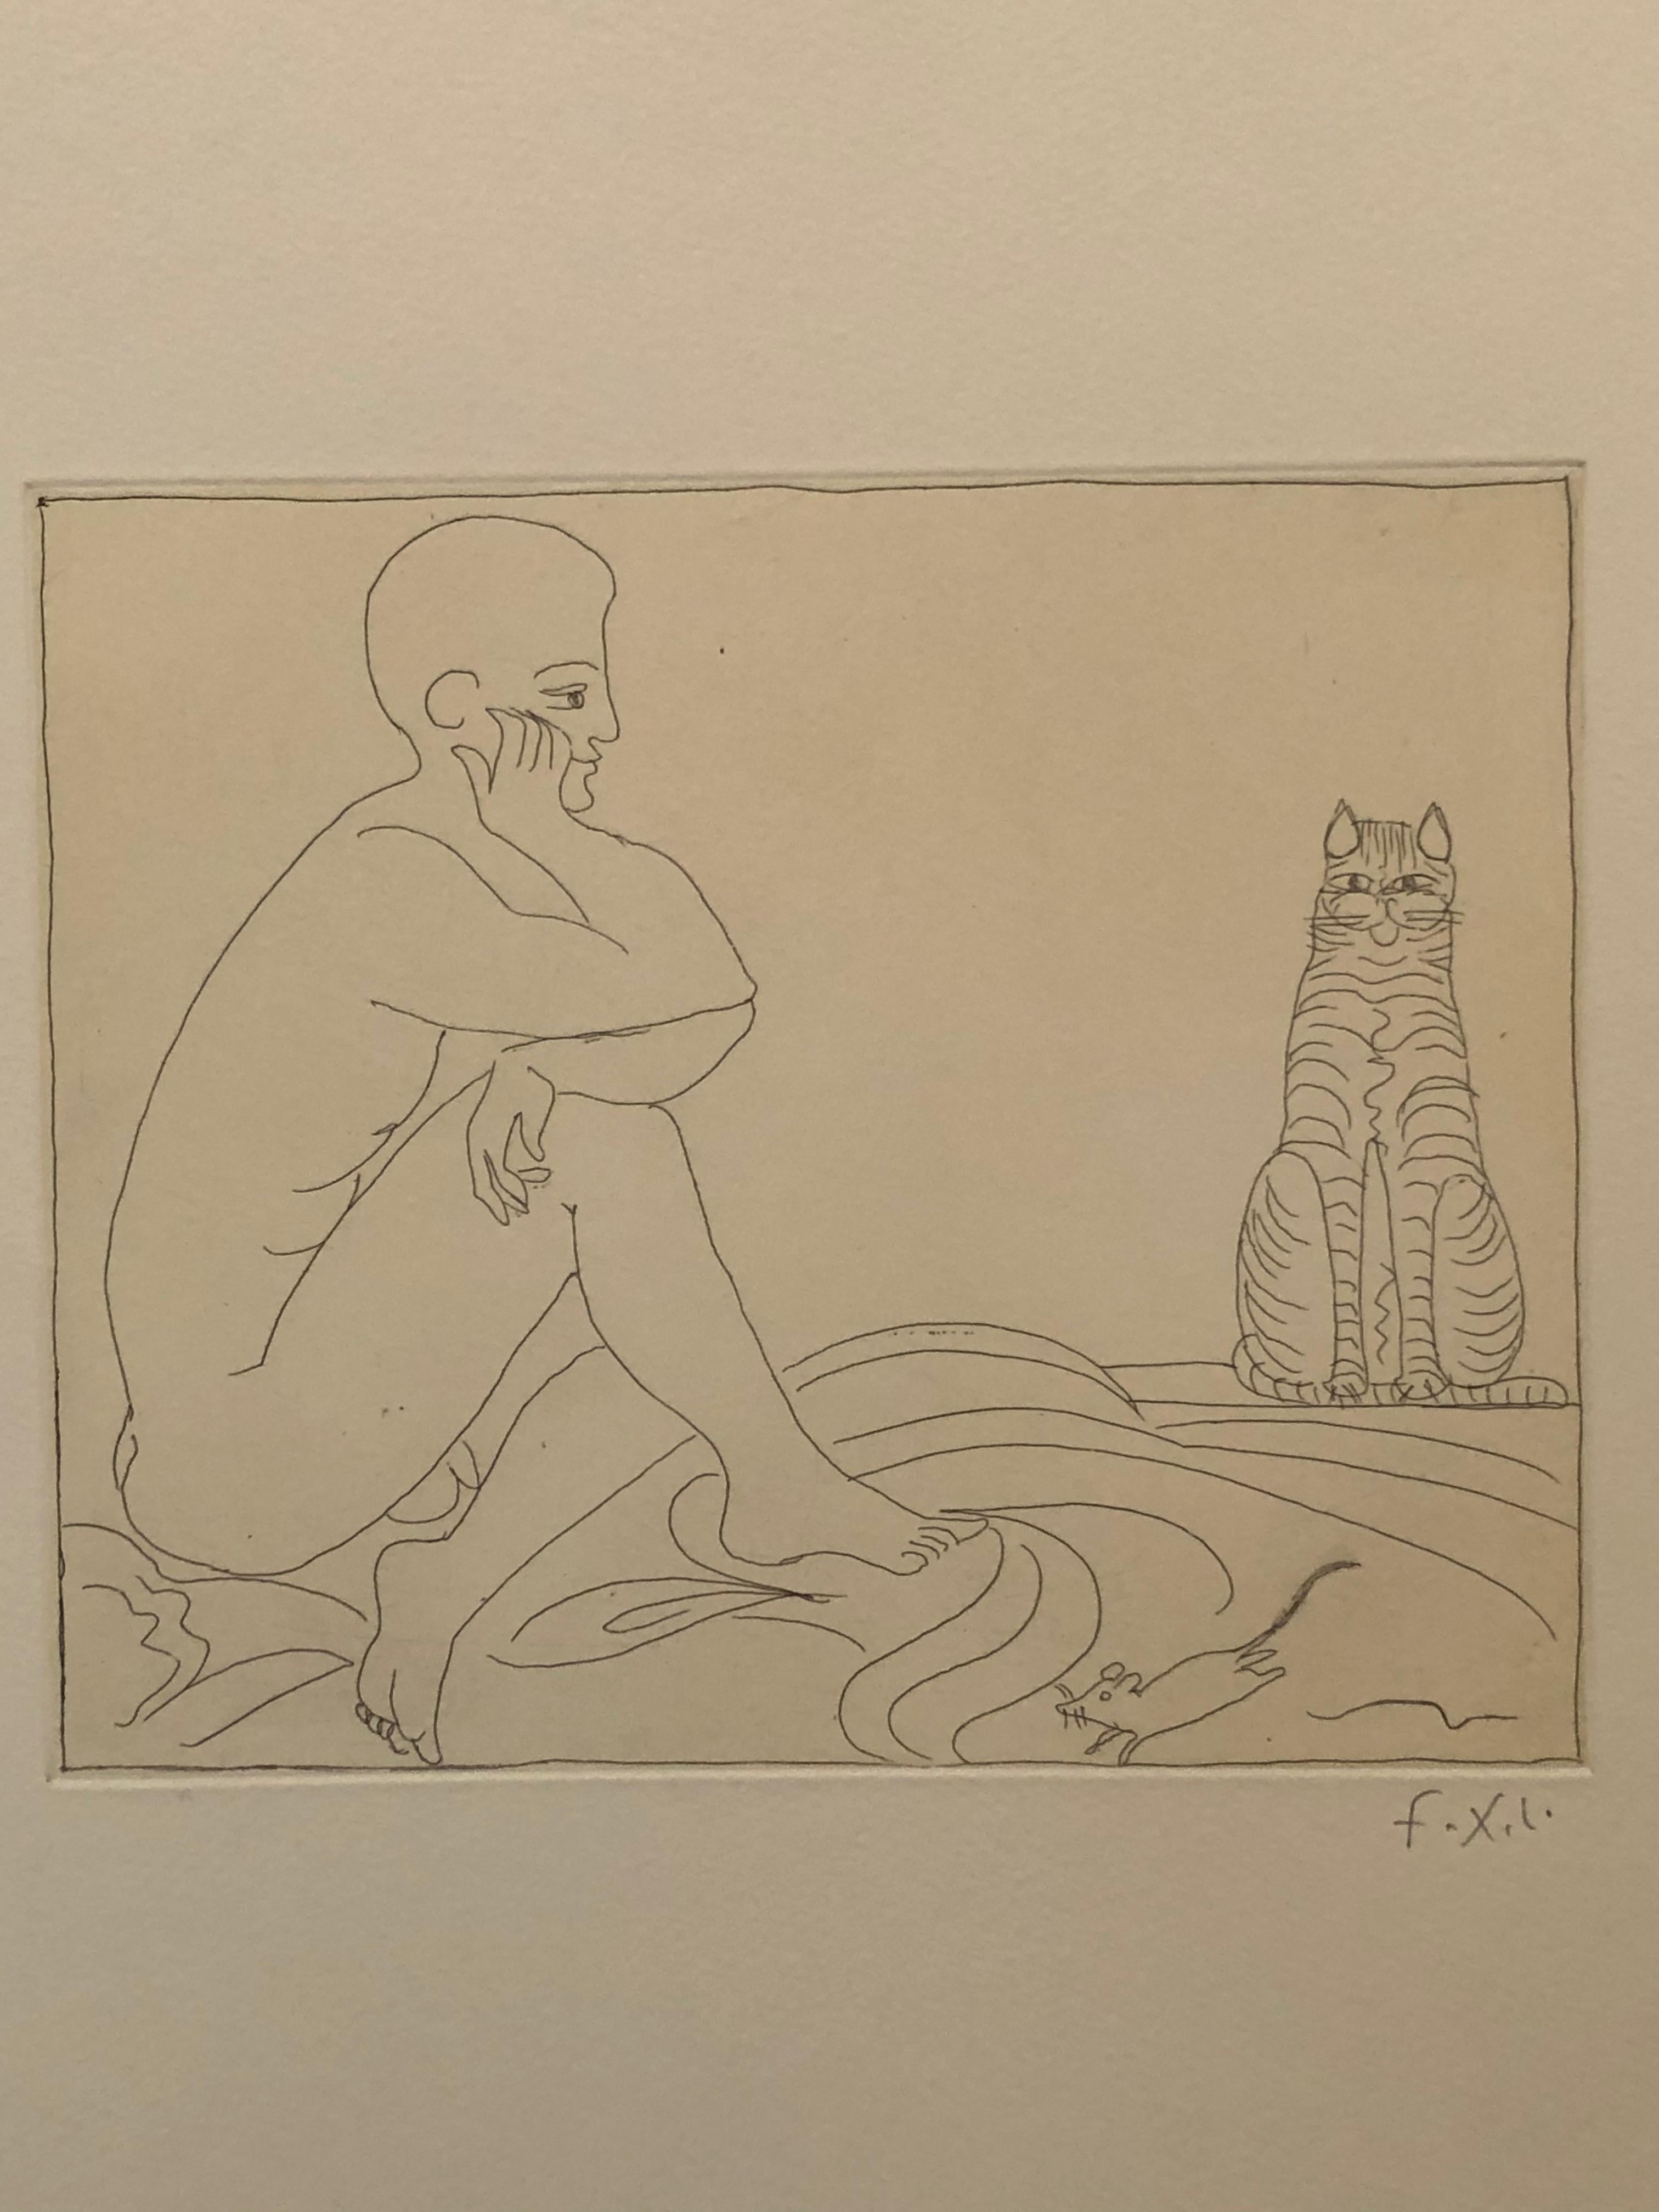 Francois-Xavier Lalanne (1927-2008) Cat, mouse and seated man, 2002
Techniques : etching on paper 
Hand signed in pencil by François Xavier Lalanne, in perfect condition

 
Dimensions of the paper : 38 x 28 cm (14,96 x 11 inches)
Dimensions of the